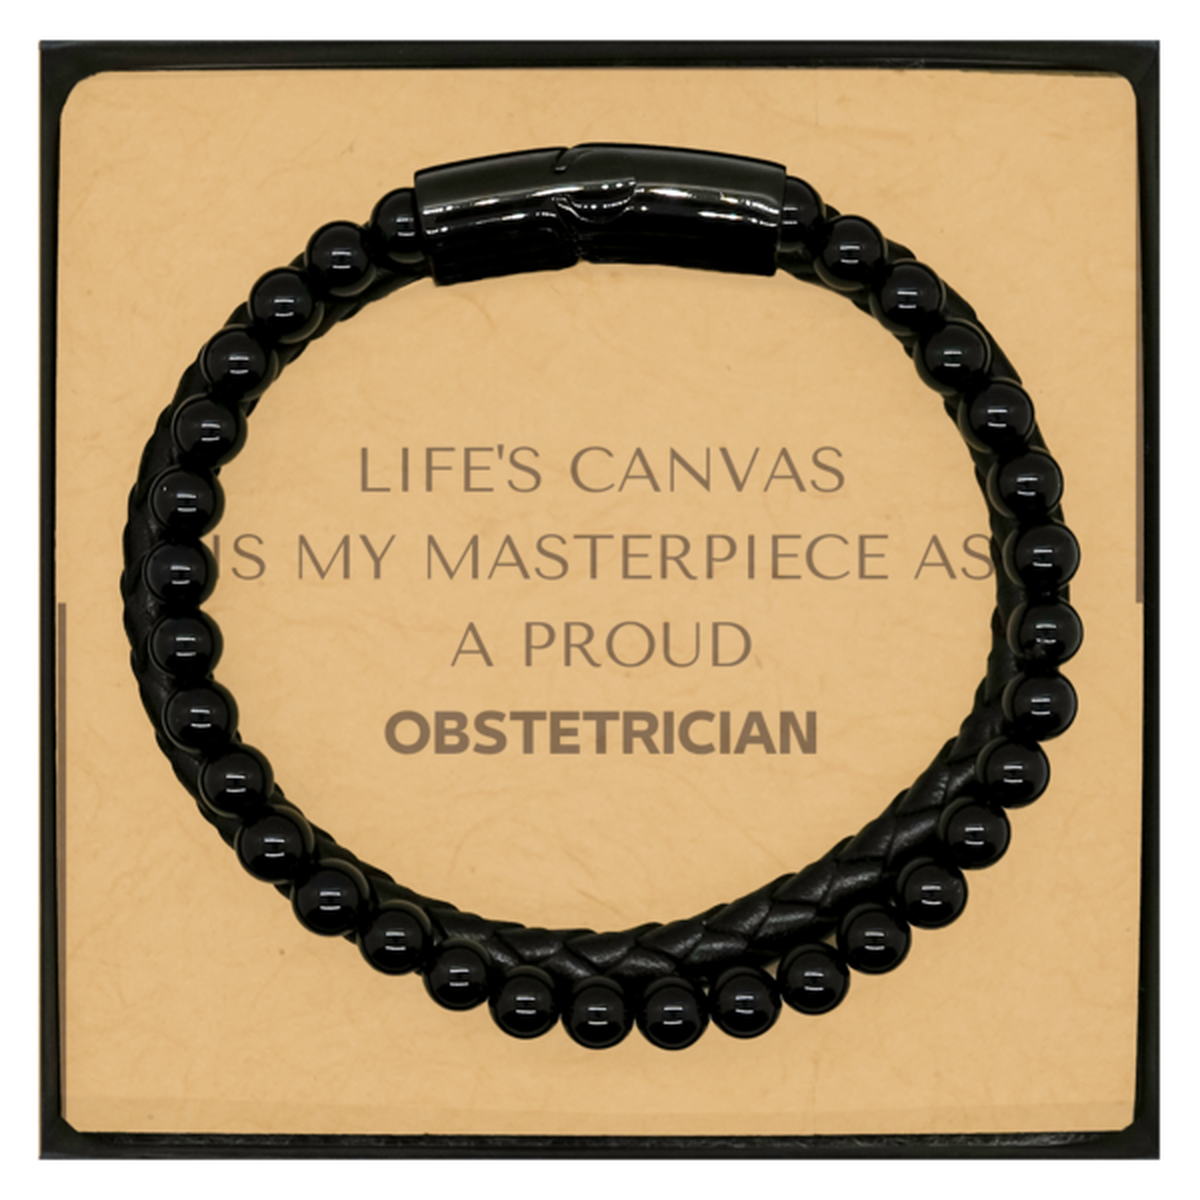 Proud Obstetrician Gifts, Life's canvas is my masterpiece, Epic Birthday Christmas Unique Stone Leather Bracelets For Obstetrician, Coworkers, Men, Women, Friends